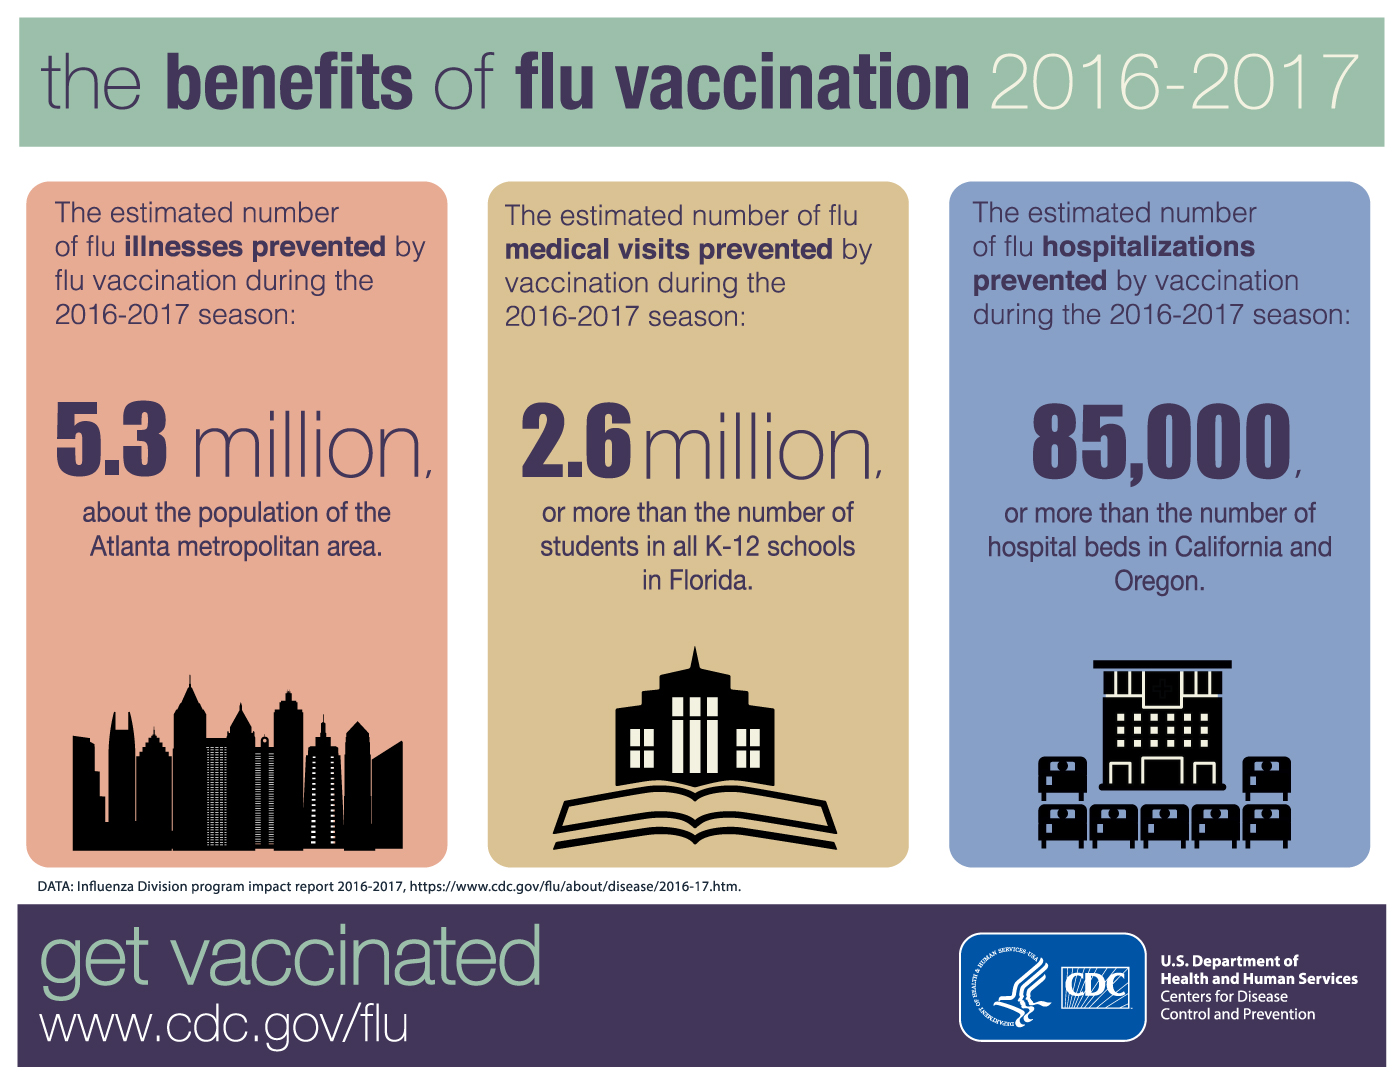 The Benefits of Flu Vaccination 2016-2017